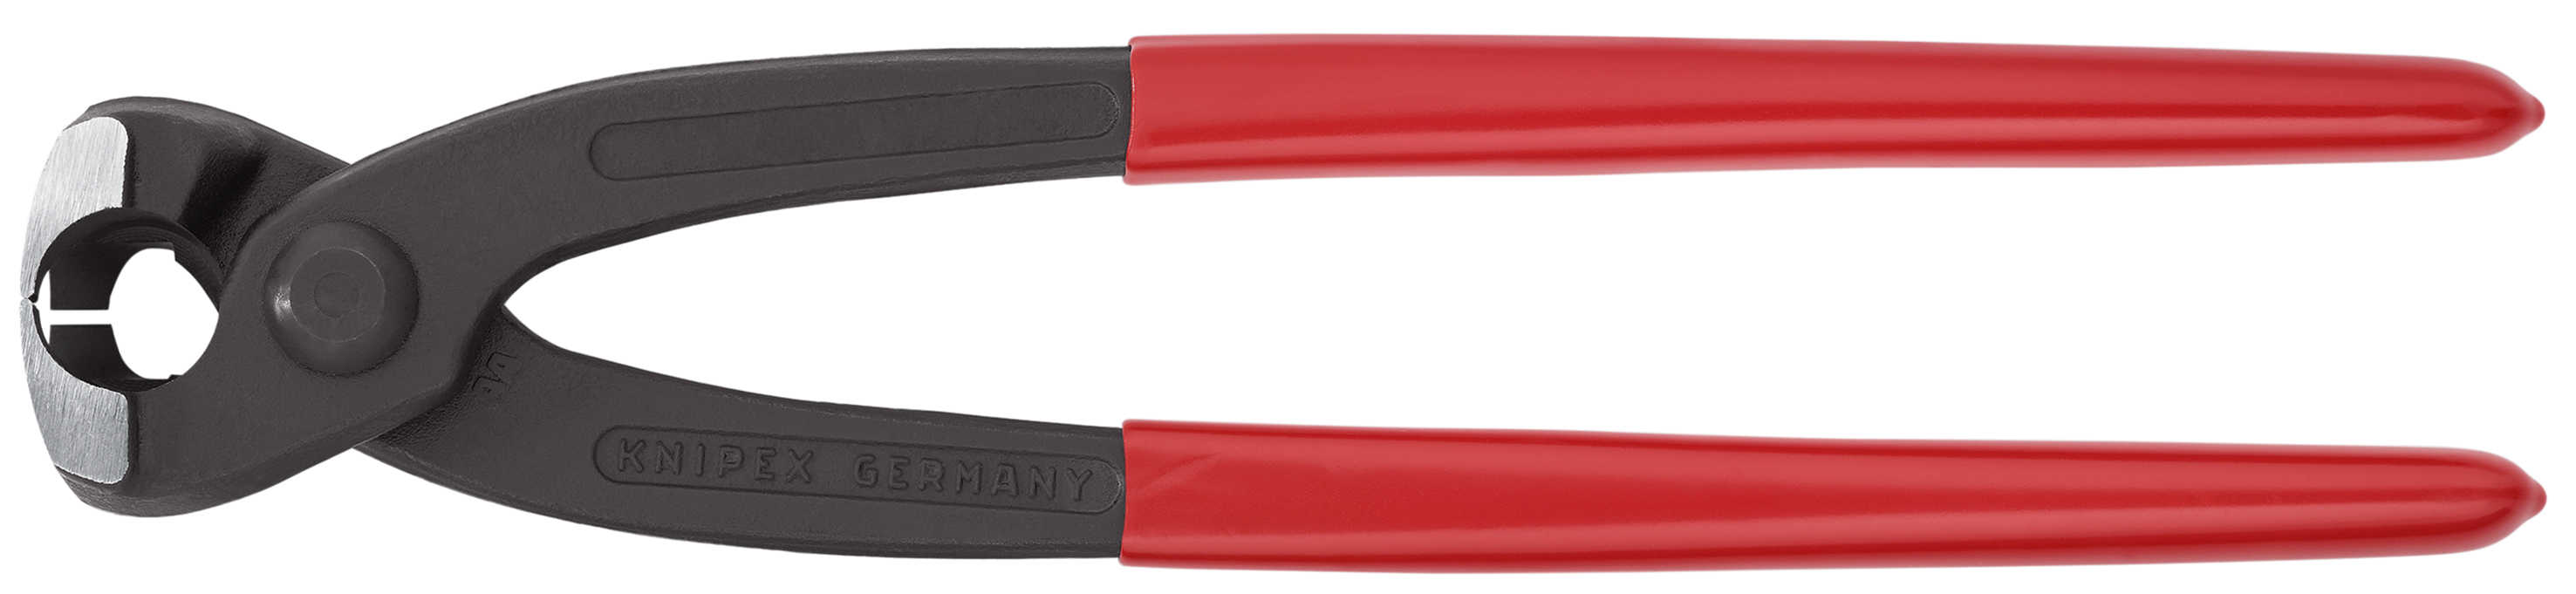 KNIPEX Tools 10 99 i220, 8.75-Inch Ear Clamp Pliers